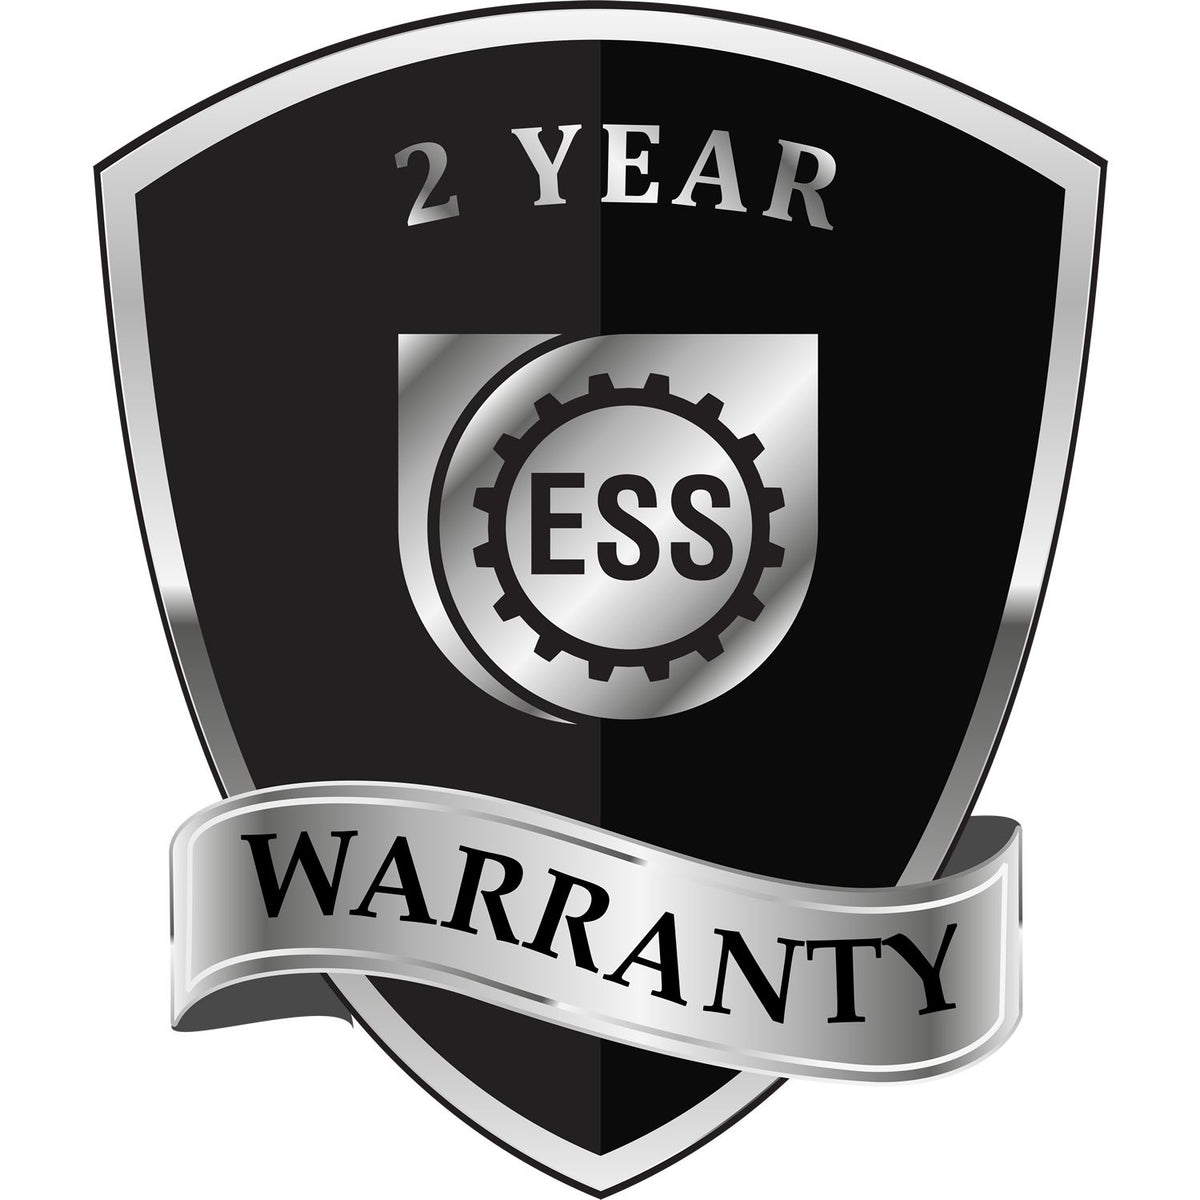 A black and silver badge or emblem showing warranty information for the Wyoming Geologist Desk Seal